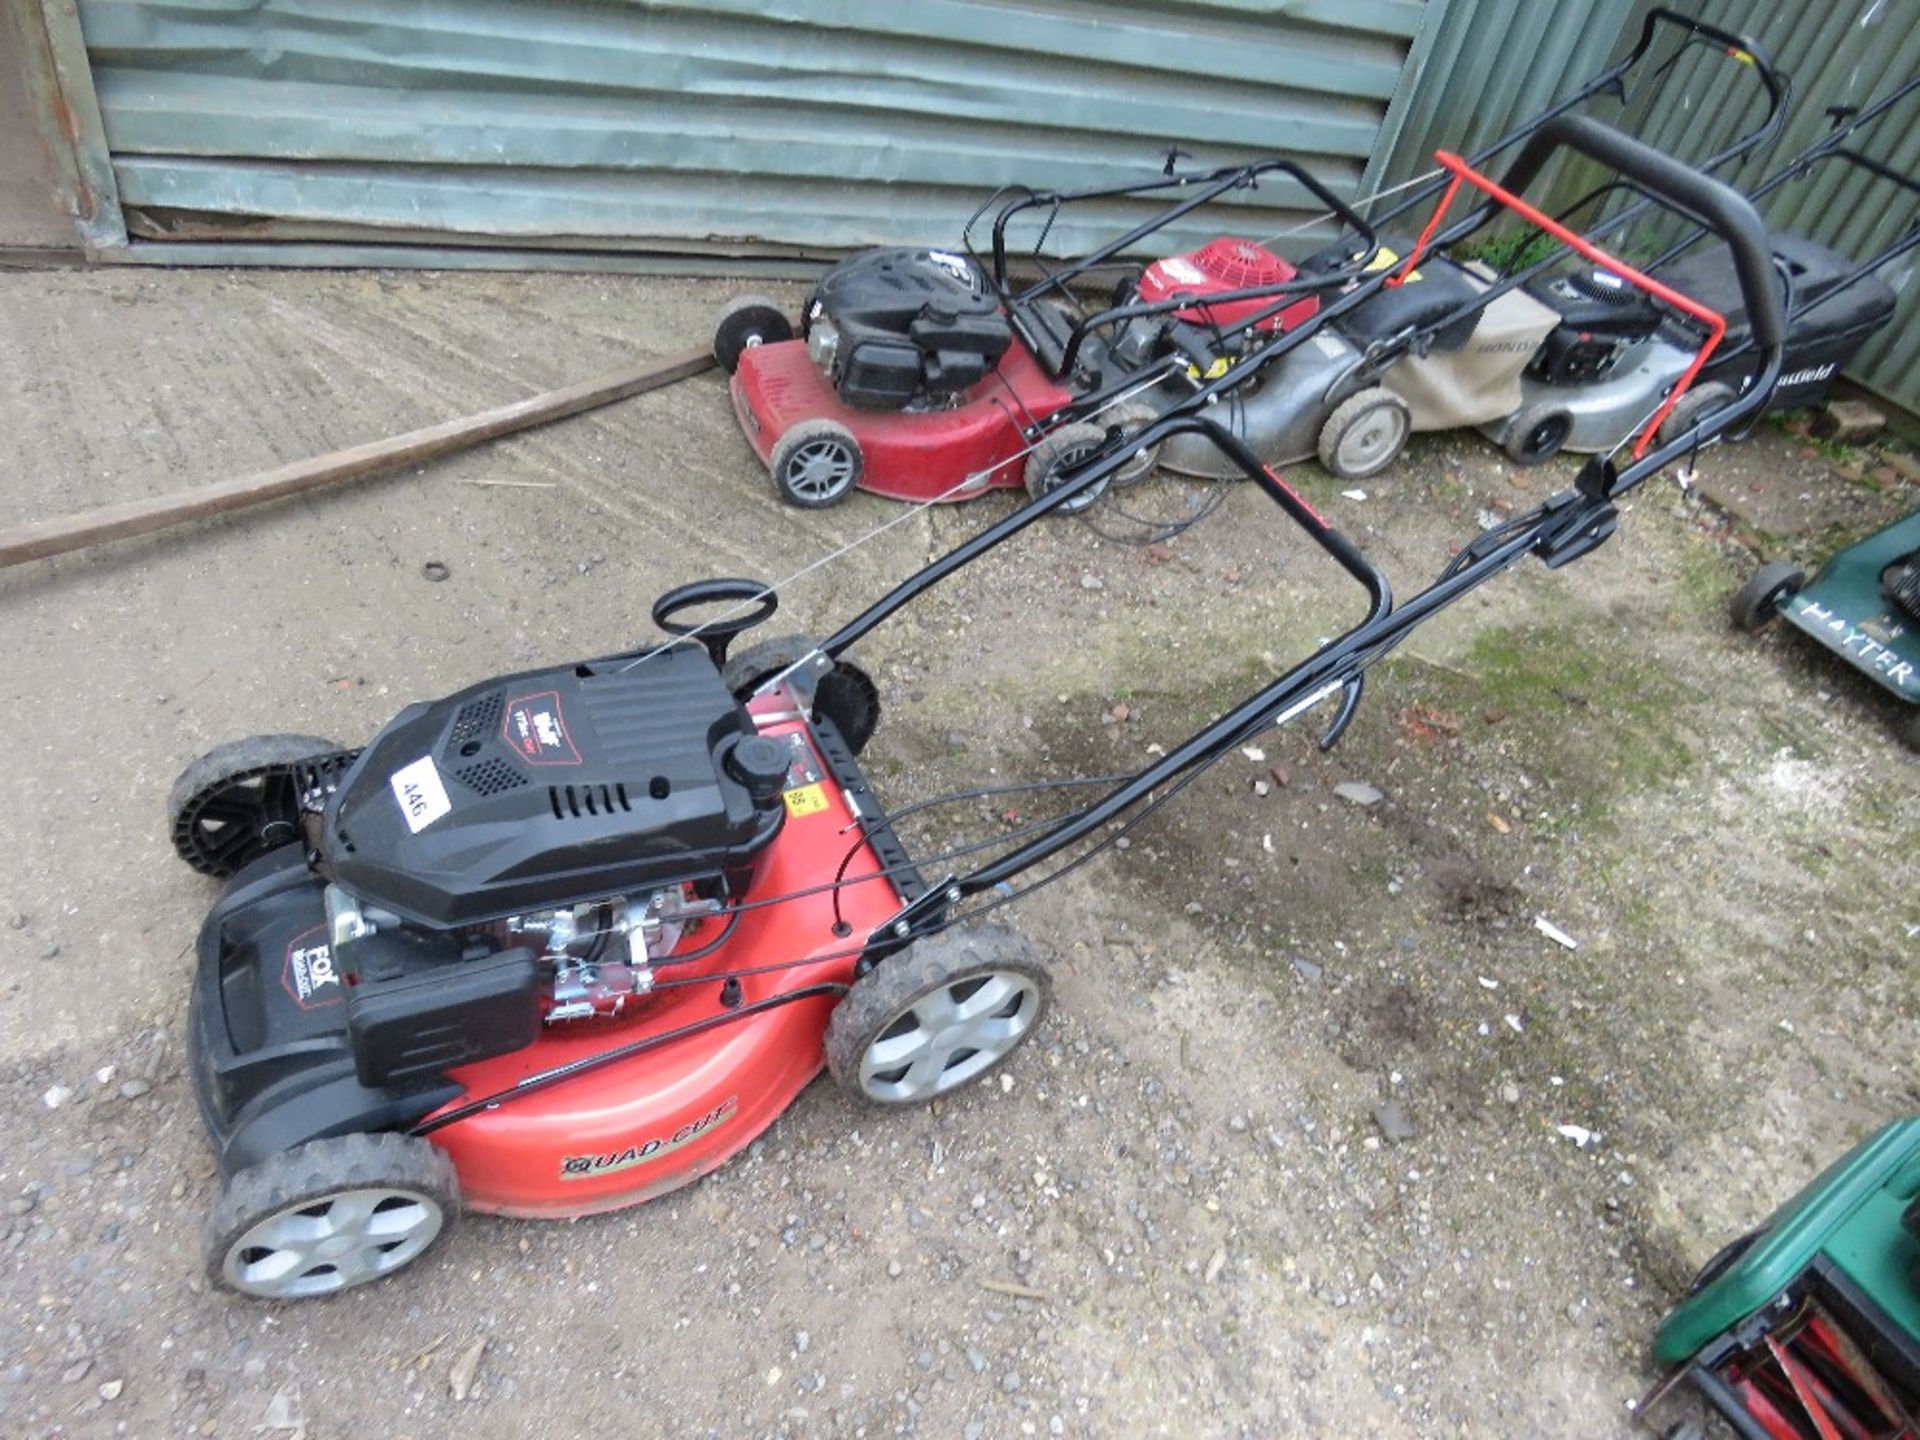 FOX QUAD CUT PETROL ENGINED MOWER WITH NO COLLECTOR. ....THIS LOT IS SOLD UNDER THE AUCTIONEERS MARG